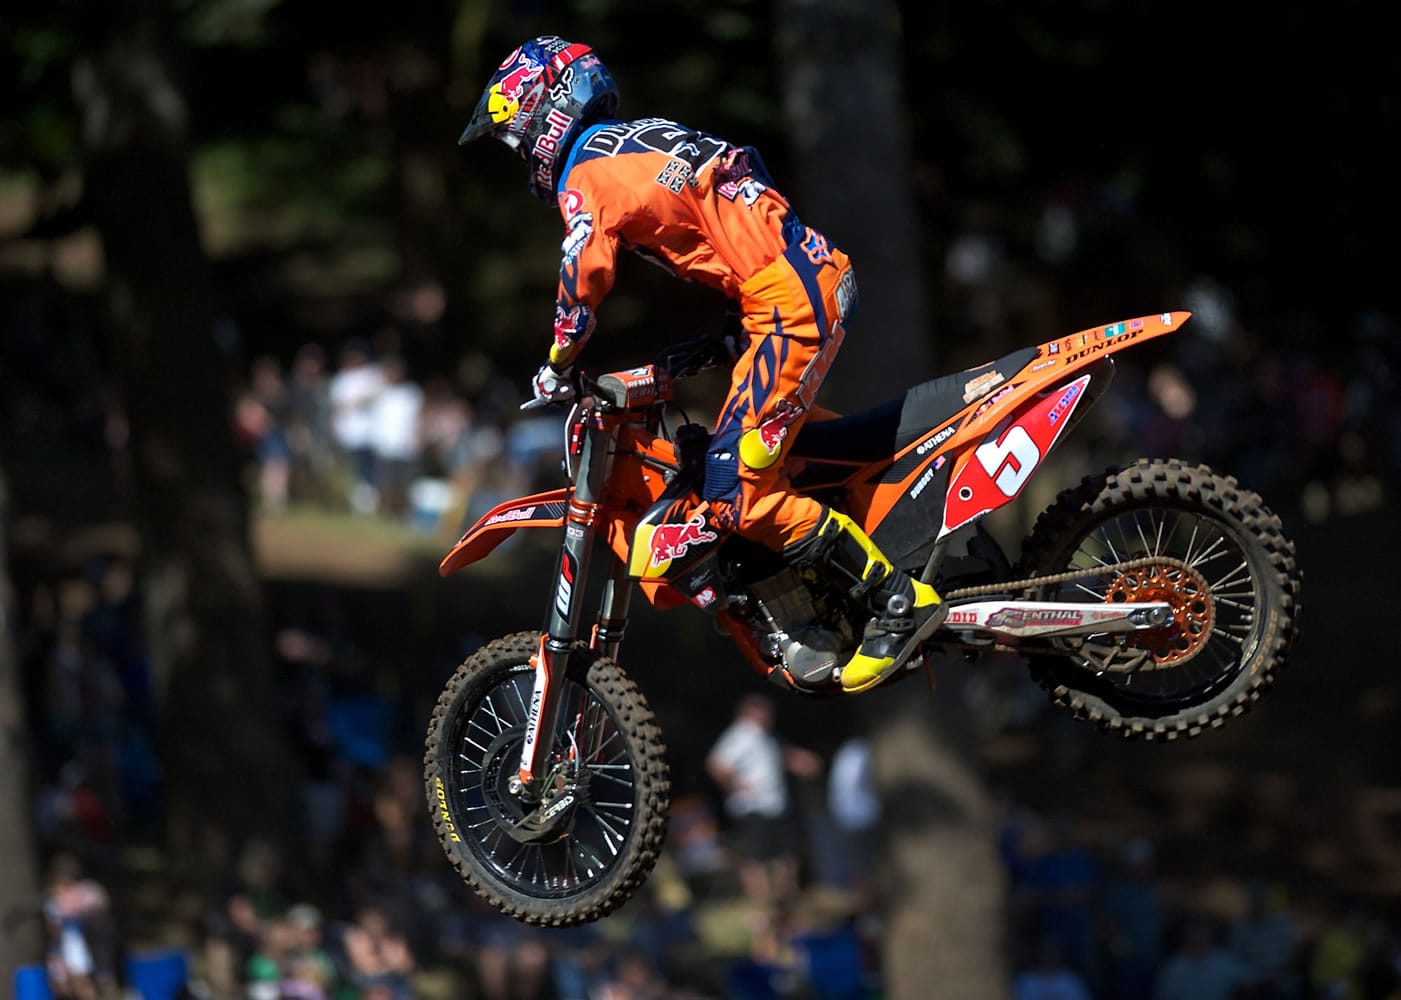 Ryan Dungey had his string of 10 straight moto wins snapped Saturday, but he won another overall title to all but wrap up the season championship.